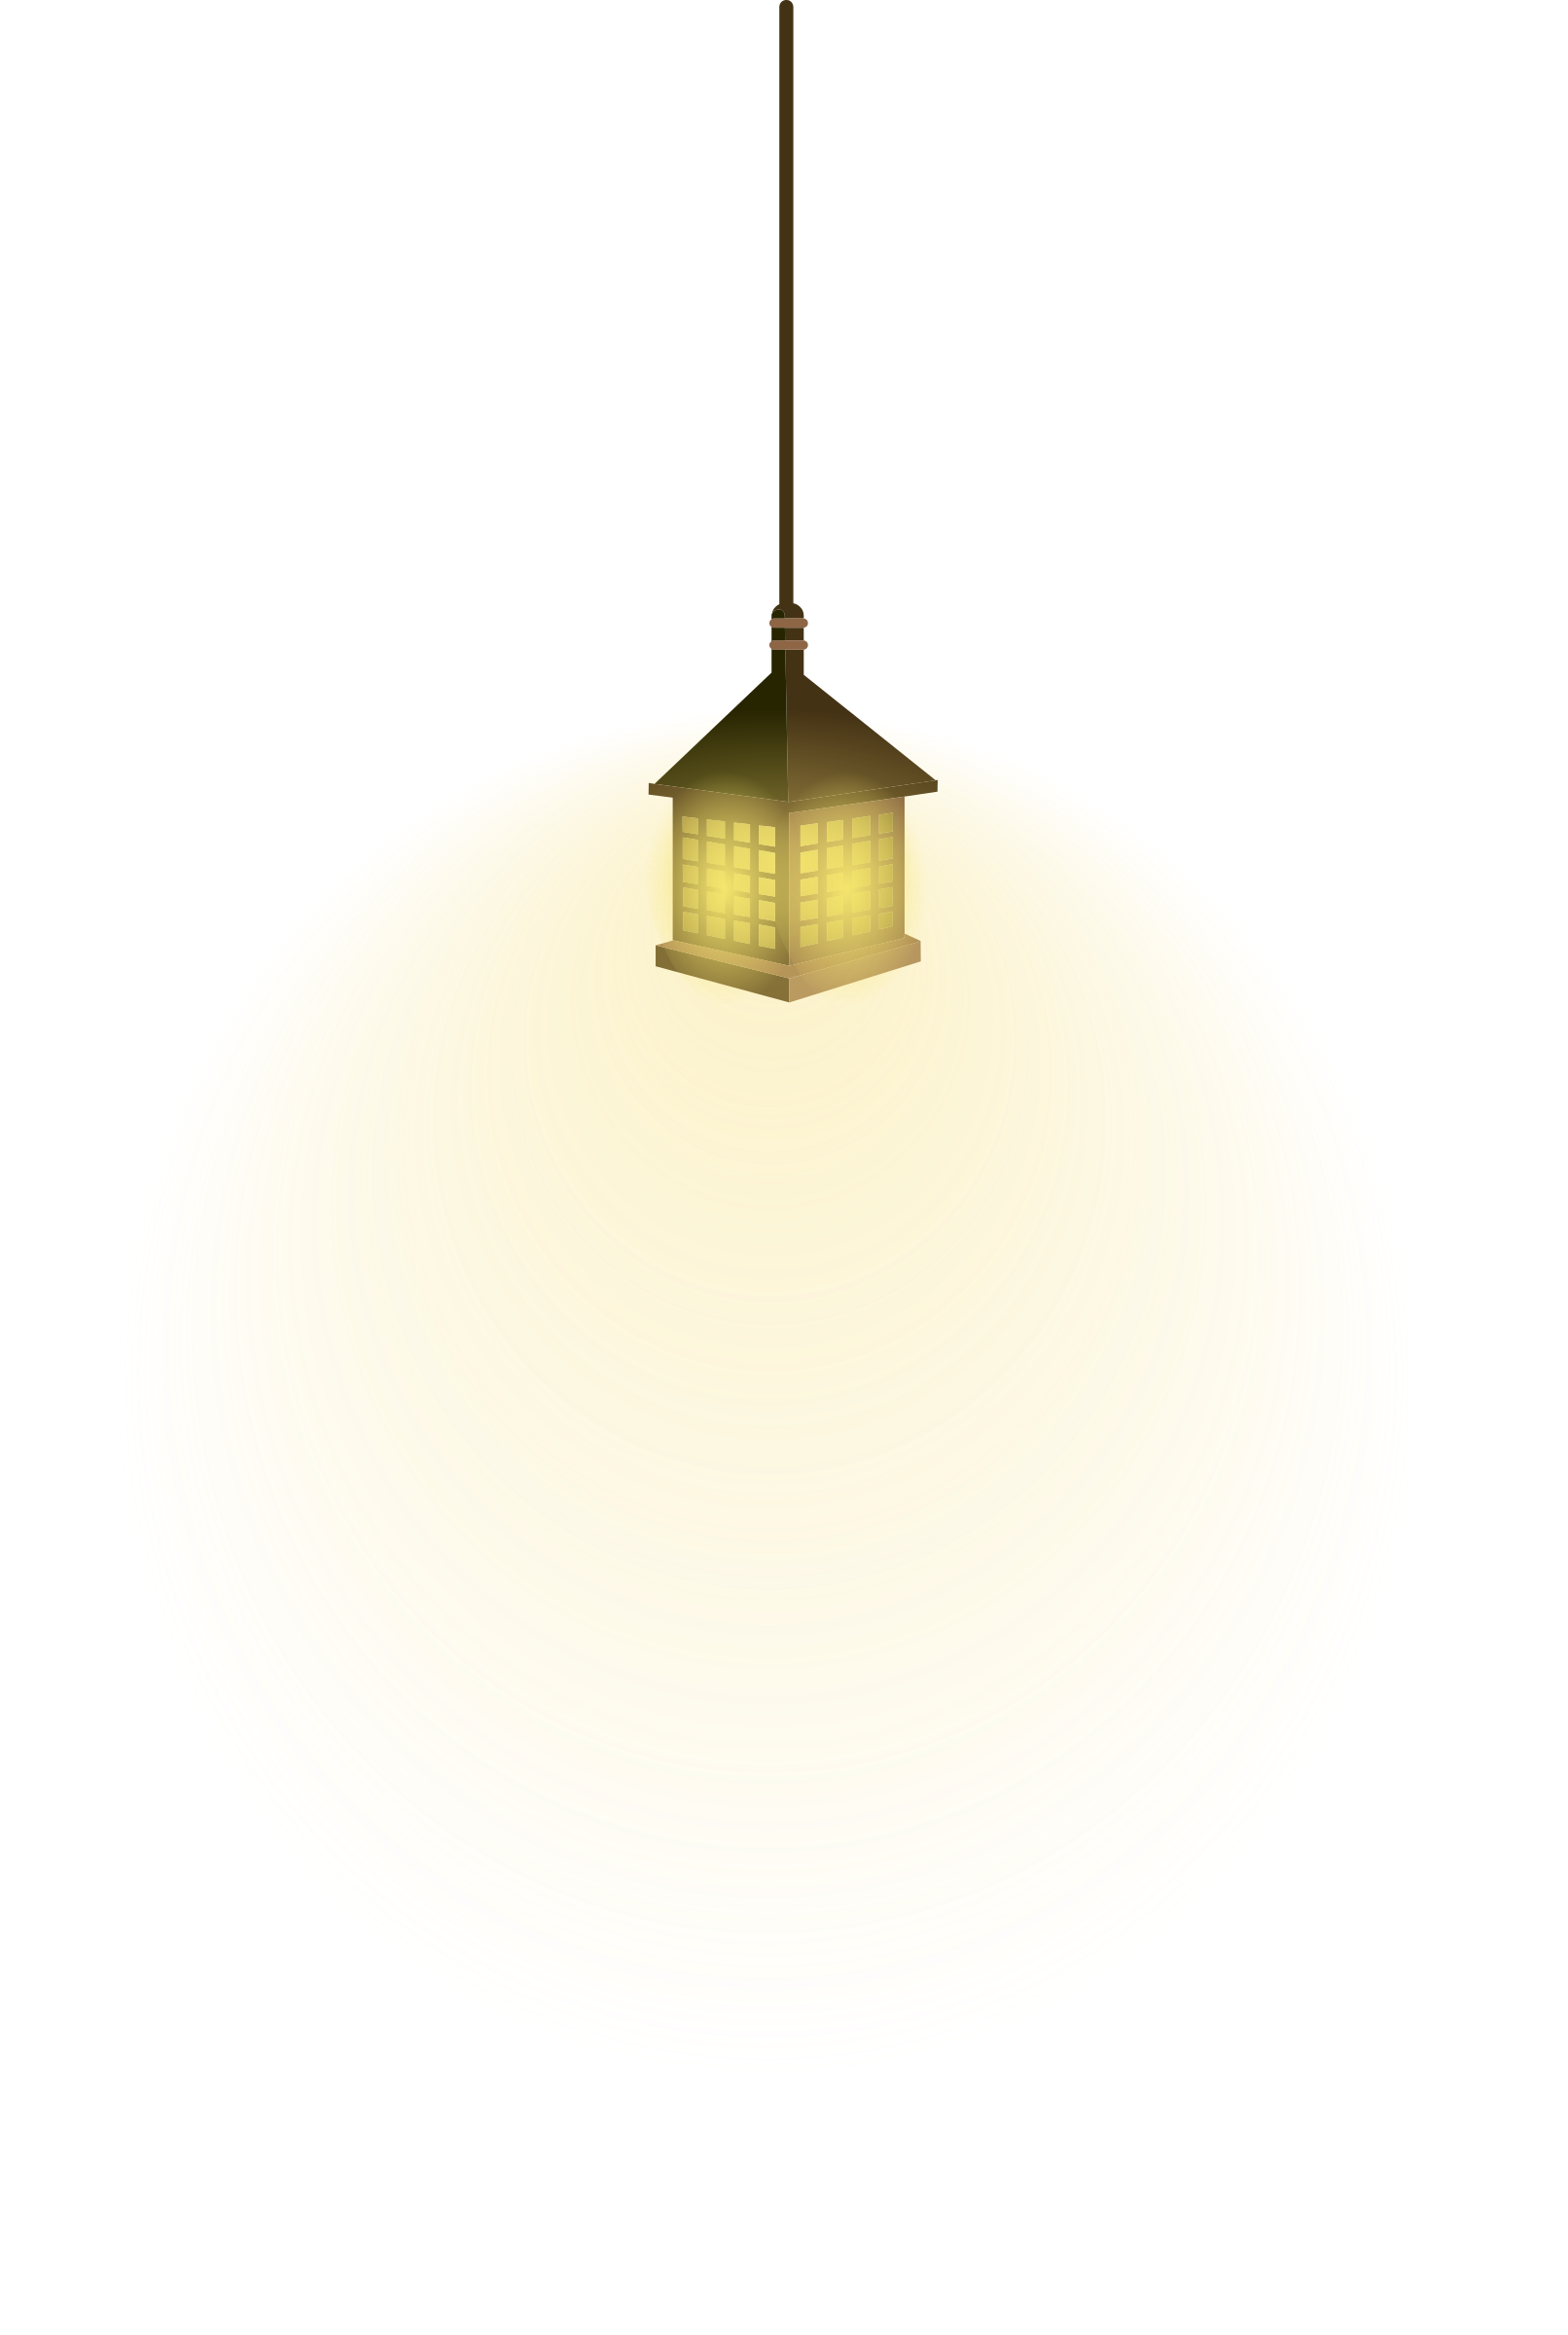 Light Lighting Fixture Ceiling Lantern HQ Image Free PNG Clipart